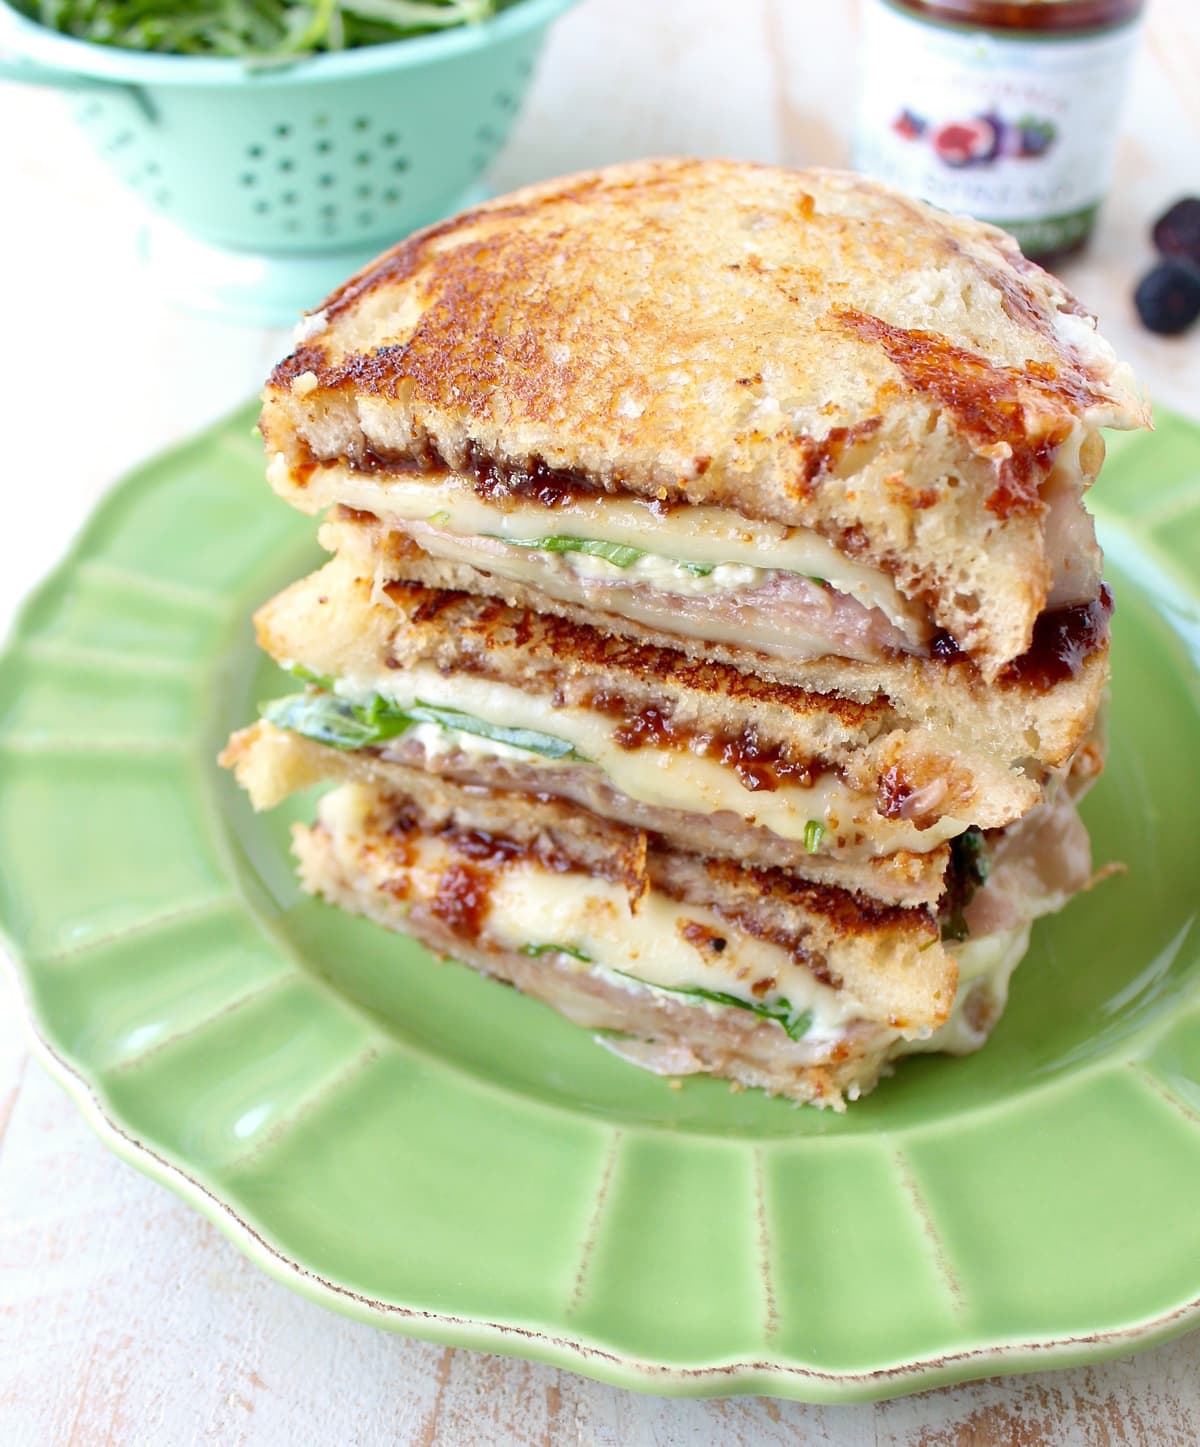 This Fig Grilled Cheese Sandwich recipe is filled with prosciutto, provolone, blue cheese, arugula & fig jam for a flavorful, delicious & filling sandwich!